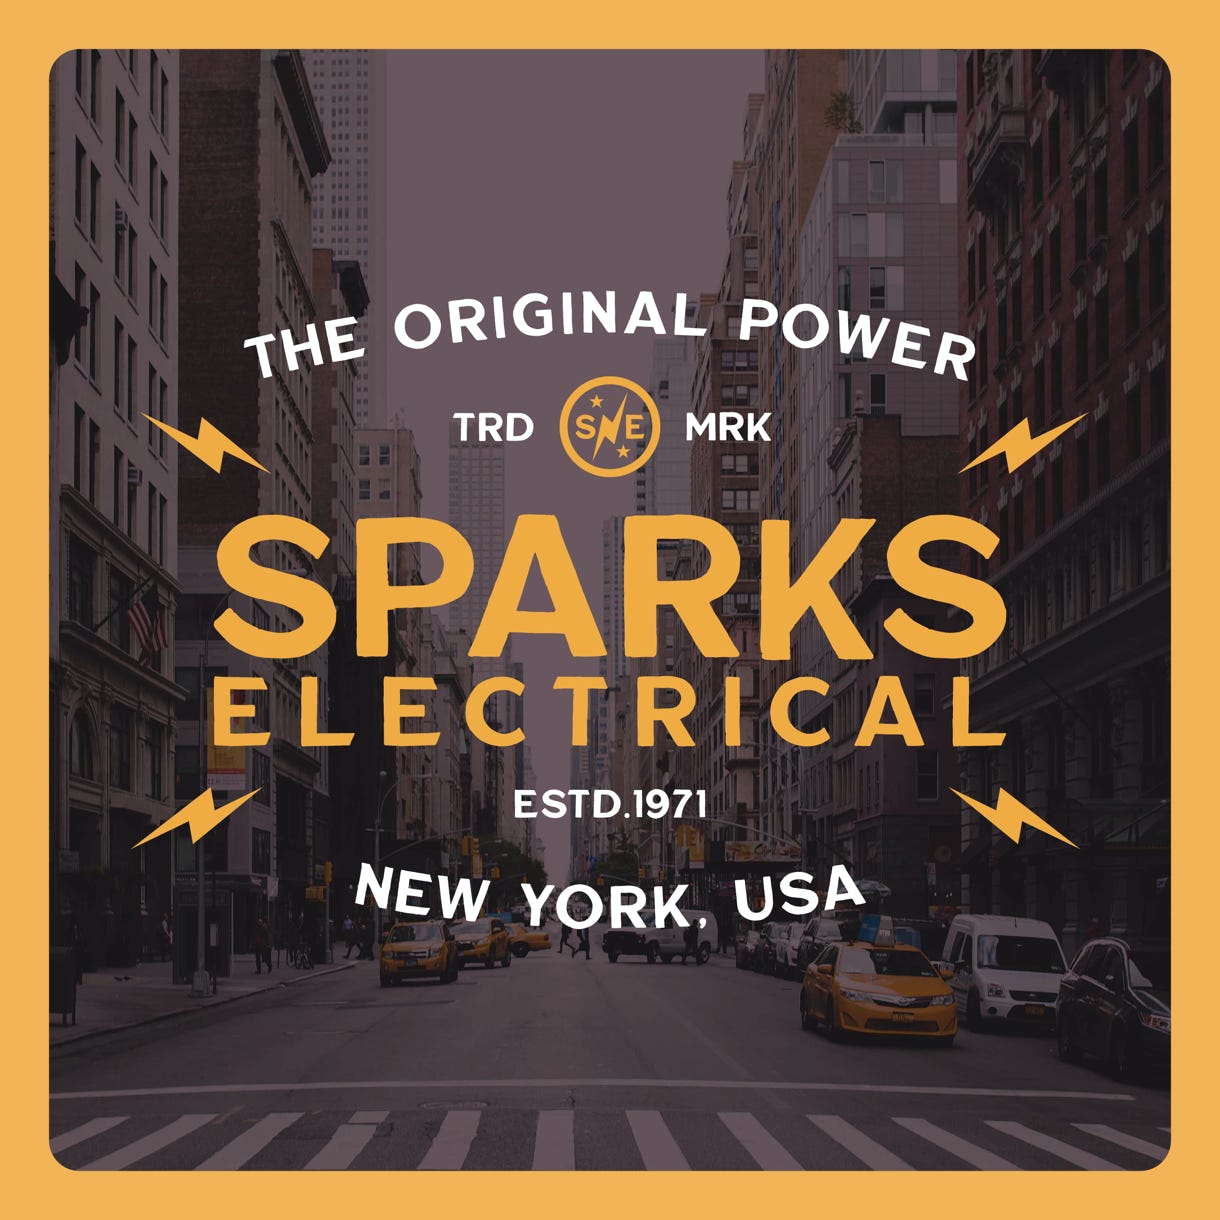 Sparks Electrical - The Original Power with Background